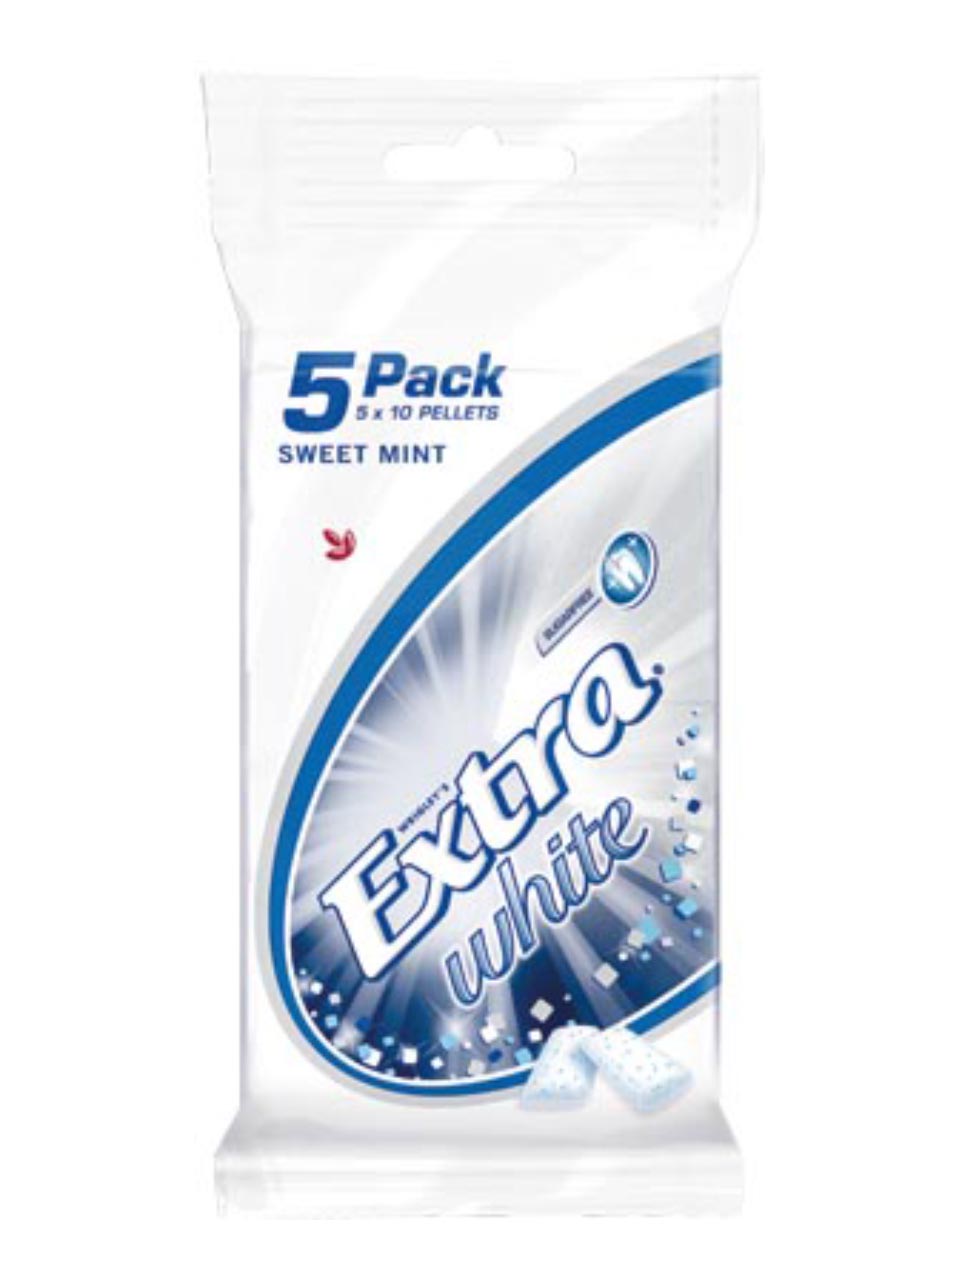 Wrigley's Extra White Sweetmint multipack 5x10 tabs
Sugar-free chewing gum dragees null - onesize - 1